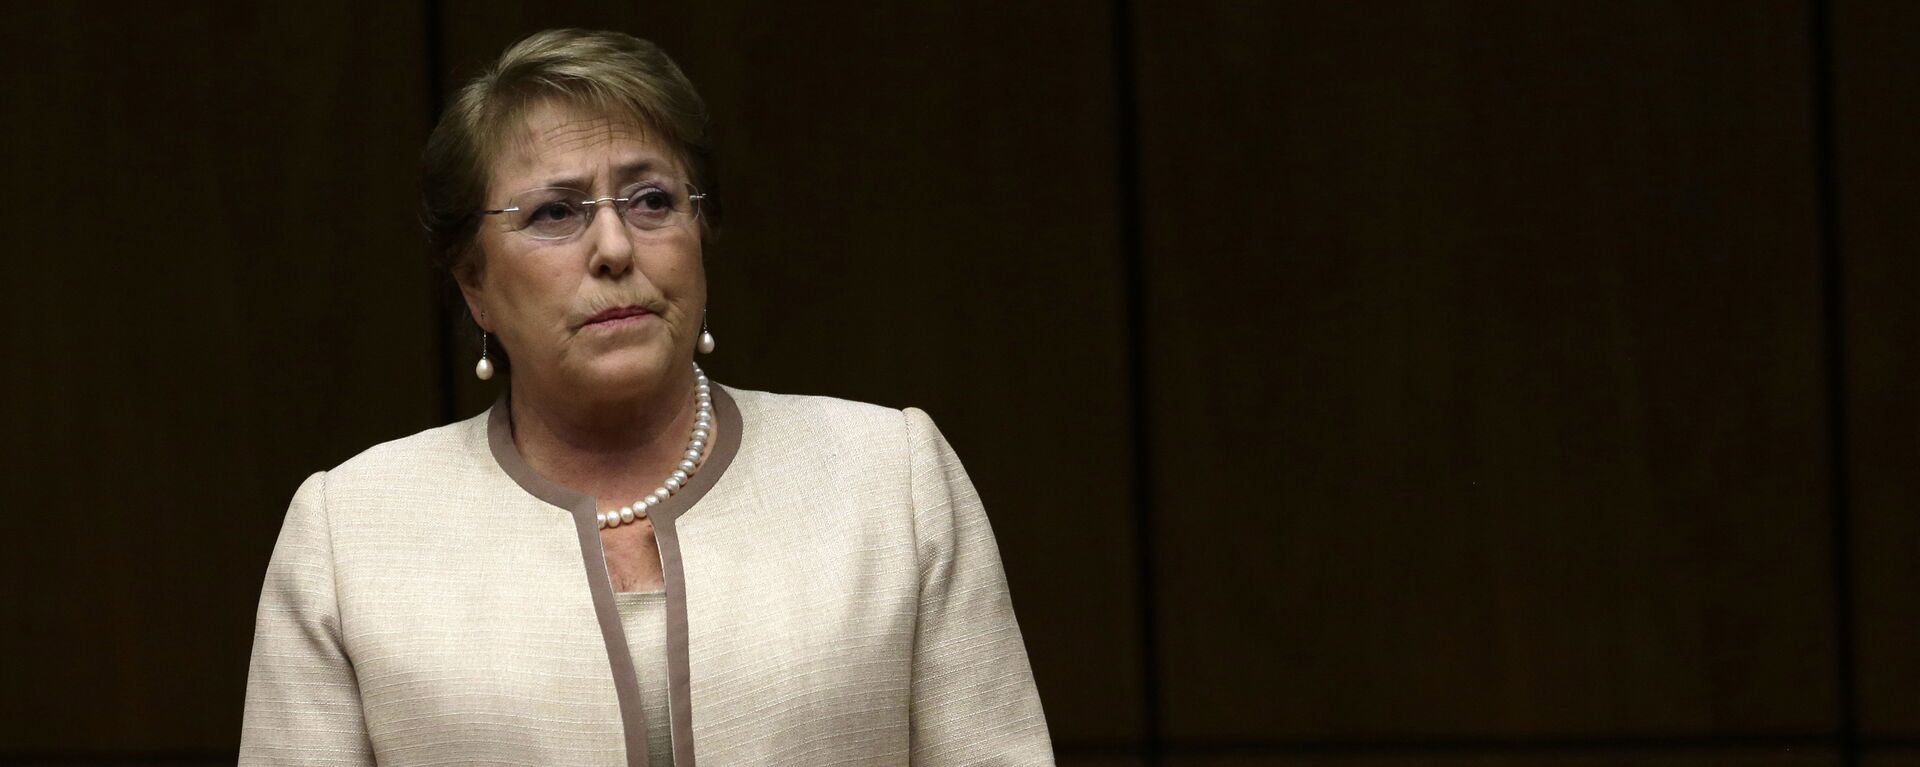 In this Aug. 21, 2015, file photo, Chile's President Michelle Bachelet attends a congressional session, during her official visit, in Asuncion, Paraguay - Sputnik Mundo, 1920, 10.05.2021